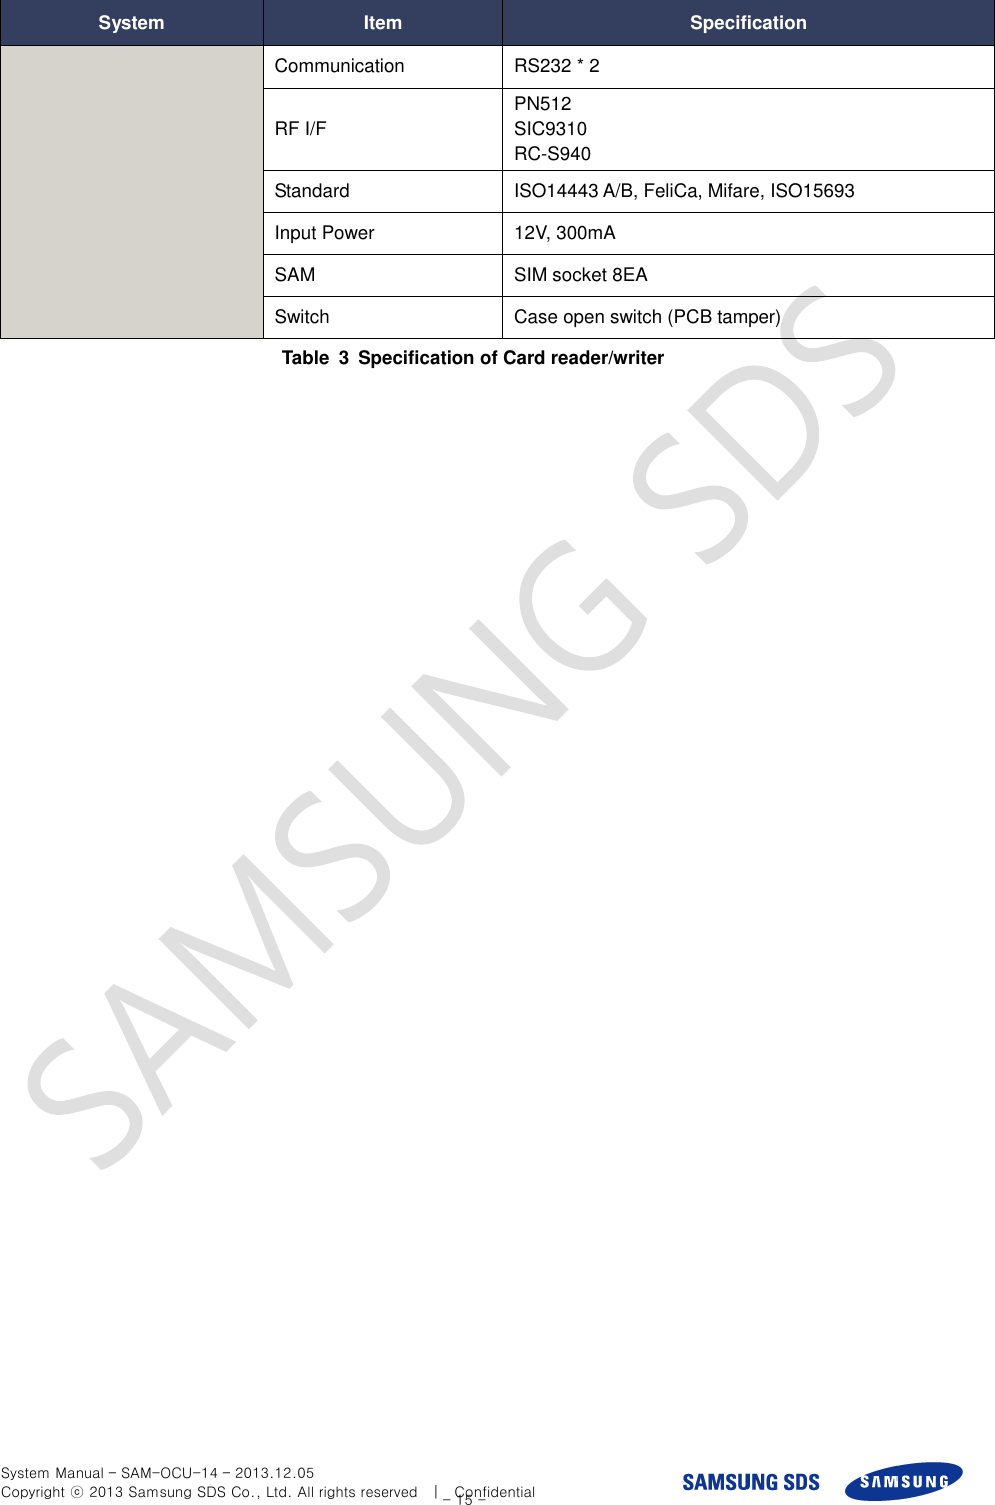  System Manual – SAM-OCU-14 – 2013.12.05 Copyright ⓒ 2013 Samsung SDS Co., Ltd. All rights reserved    |    Confidential - 15 - System Item Specification Communication RS232 * 2 RF I/F PN512 SIC9310 RC-S940 Standard ISO14443 A/B, FeliCa, Mifare, ISO15693 Input Power 12V, 300mA SAM SIM socket 8EA Switch Case open switch (PCB tamper) Table  3  Specification of Card reader/writer  